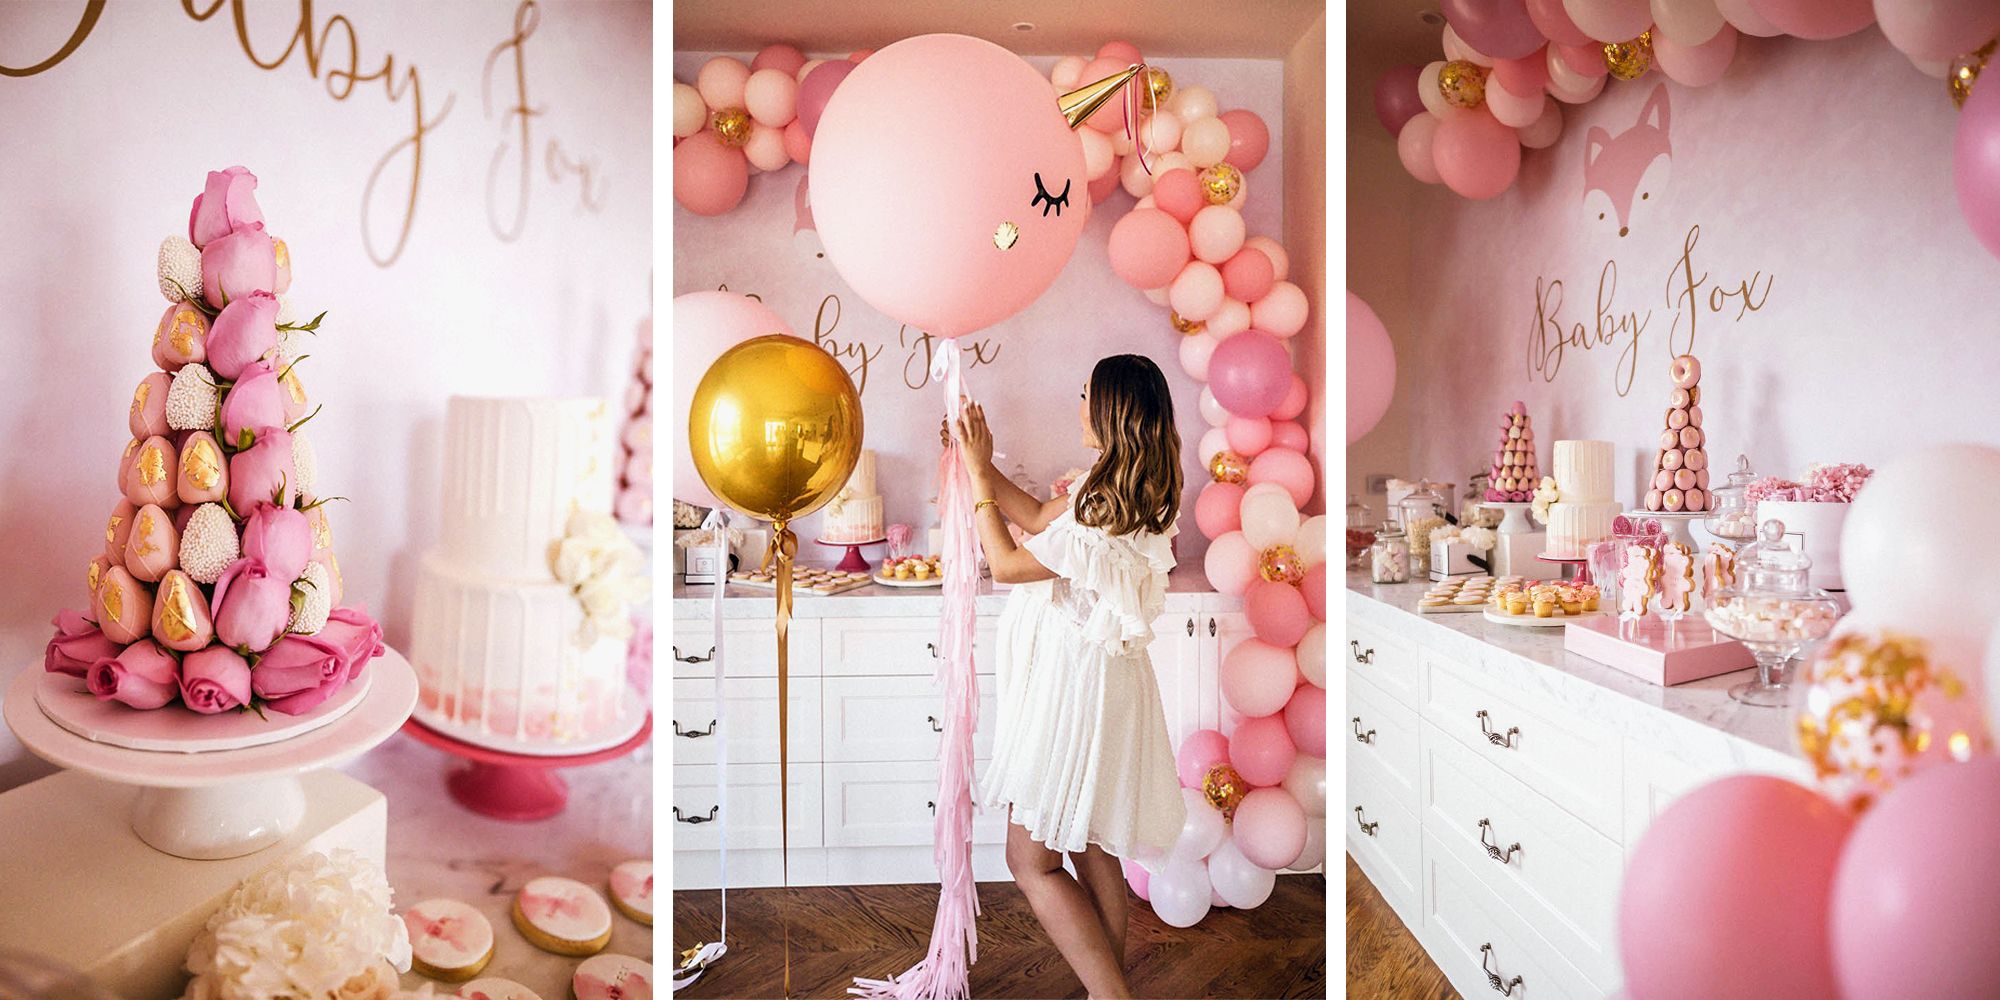 7 Best Baby Shower Ideas For 2018 Trendy Baby Shower Decorations